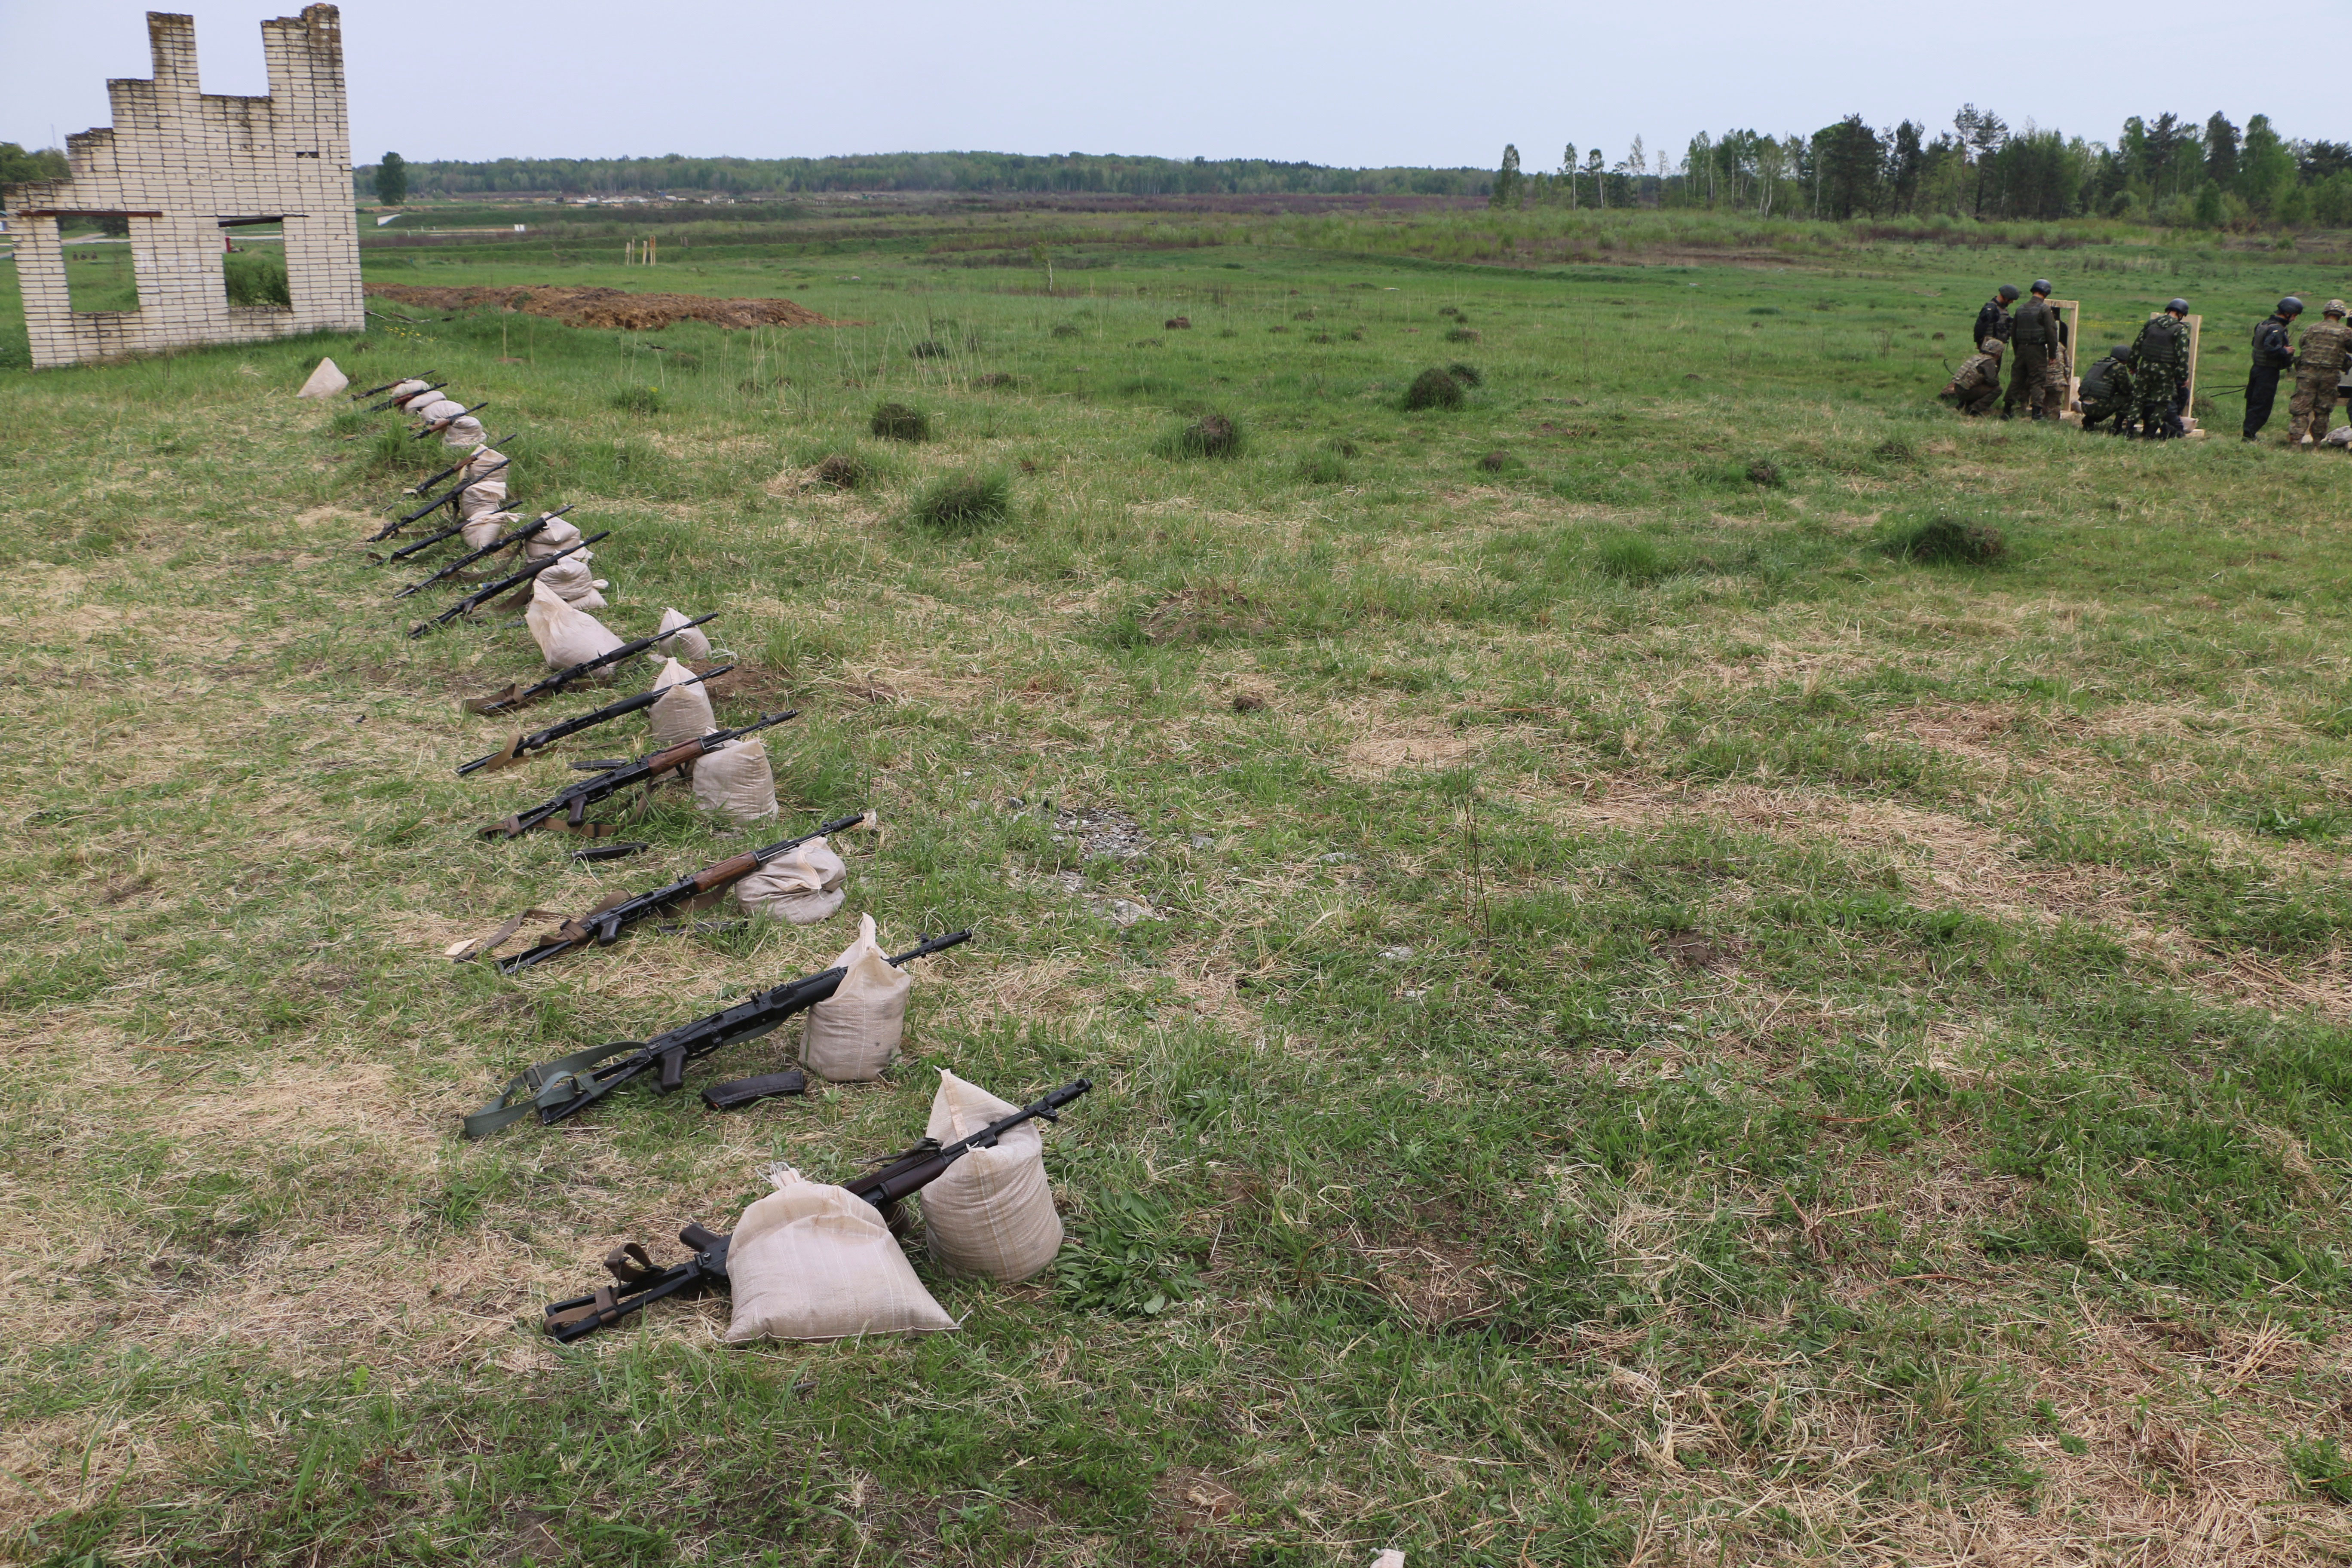 Kalashnikovs lined up on the firing range at the U.S. Army’s training mission in western Ukraine.